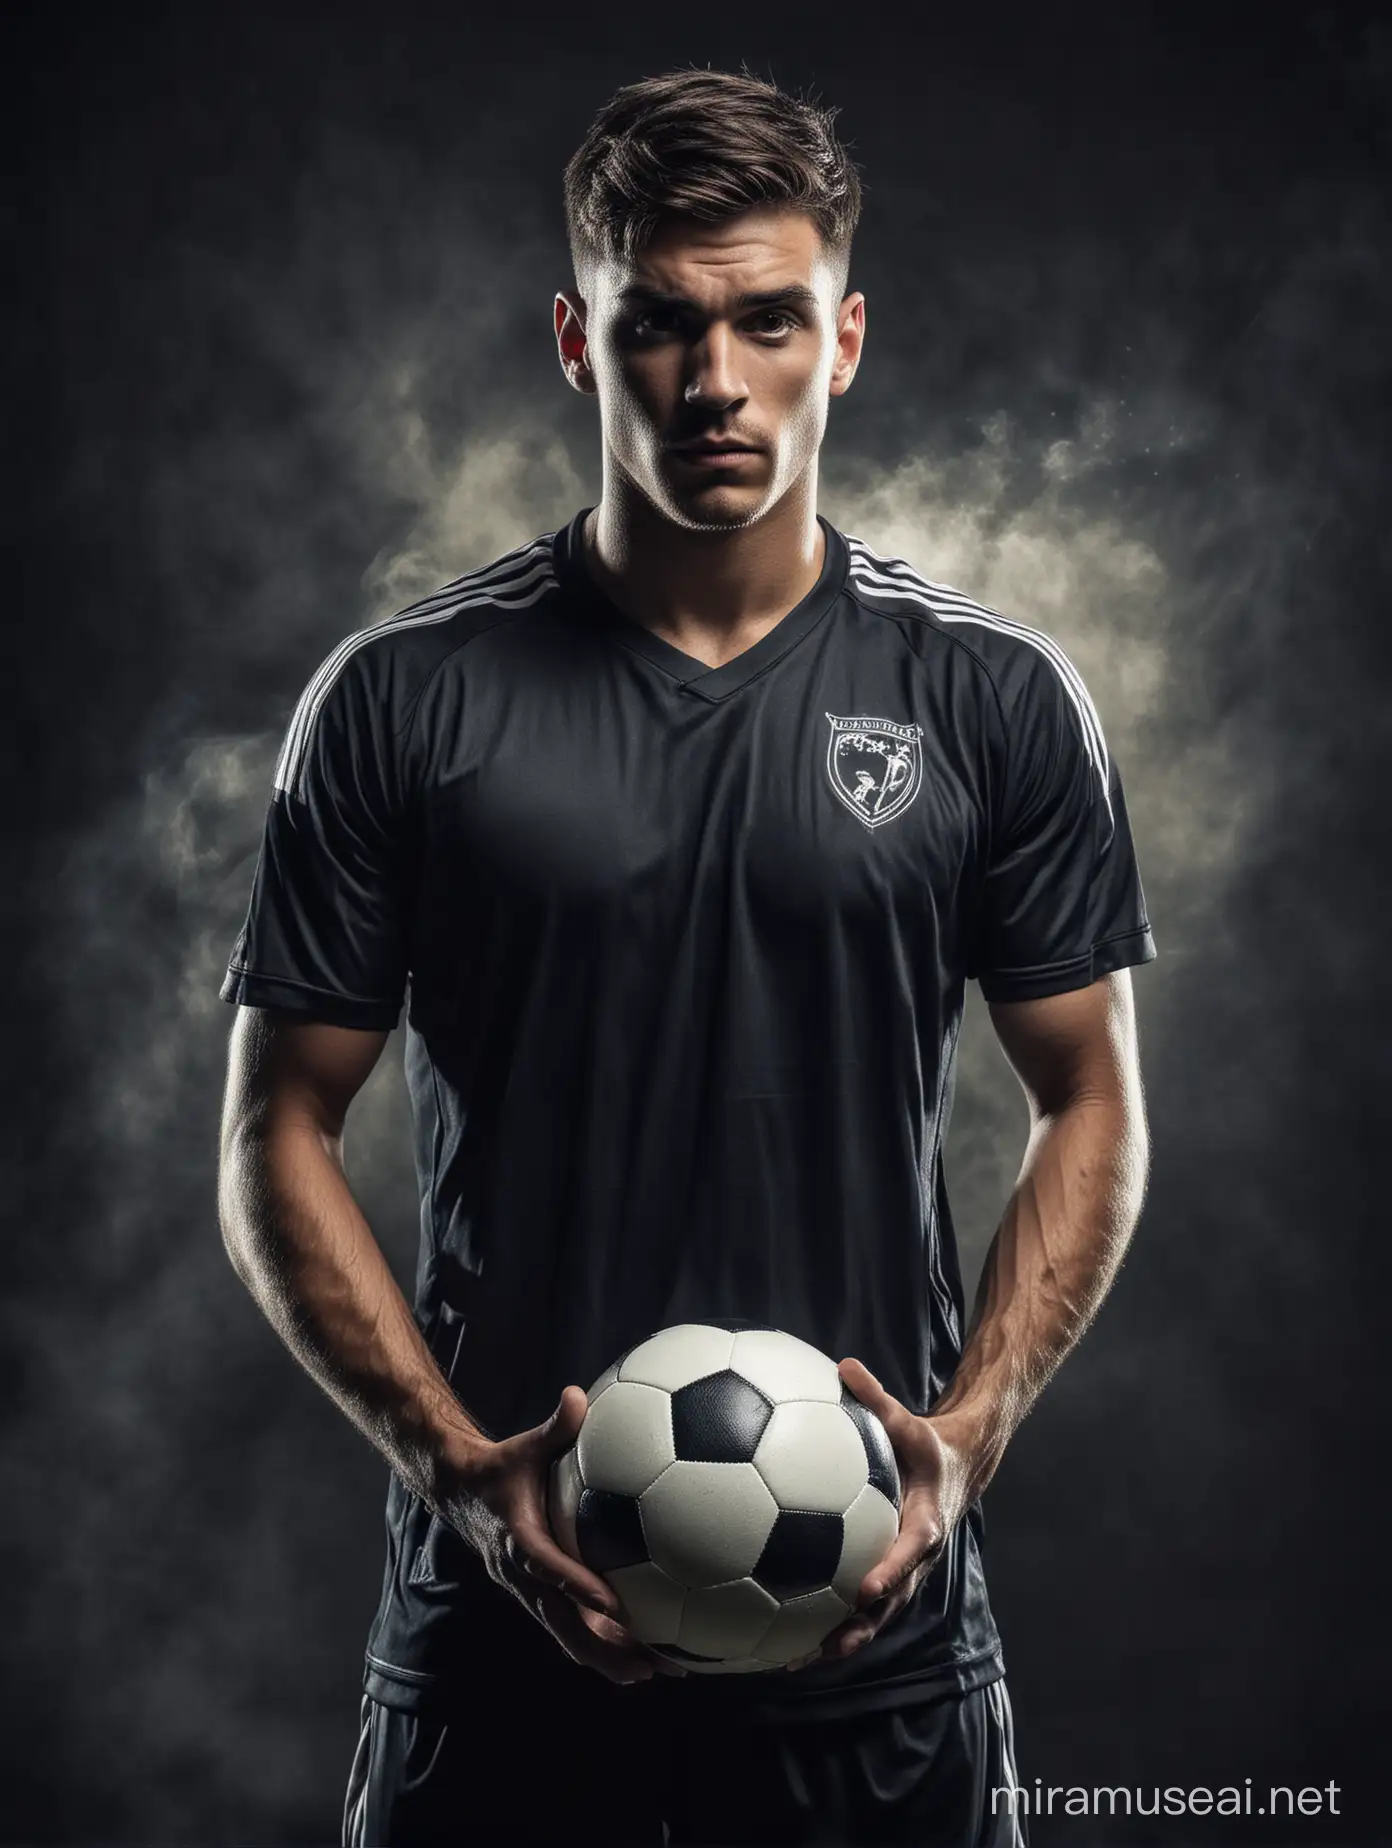 A  male soccer player, holding a football, on a dramatic background